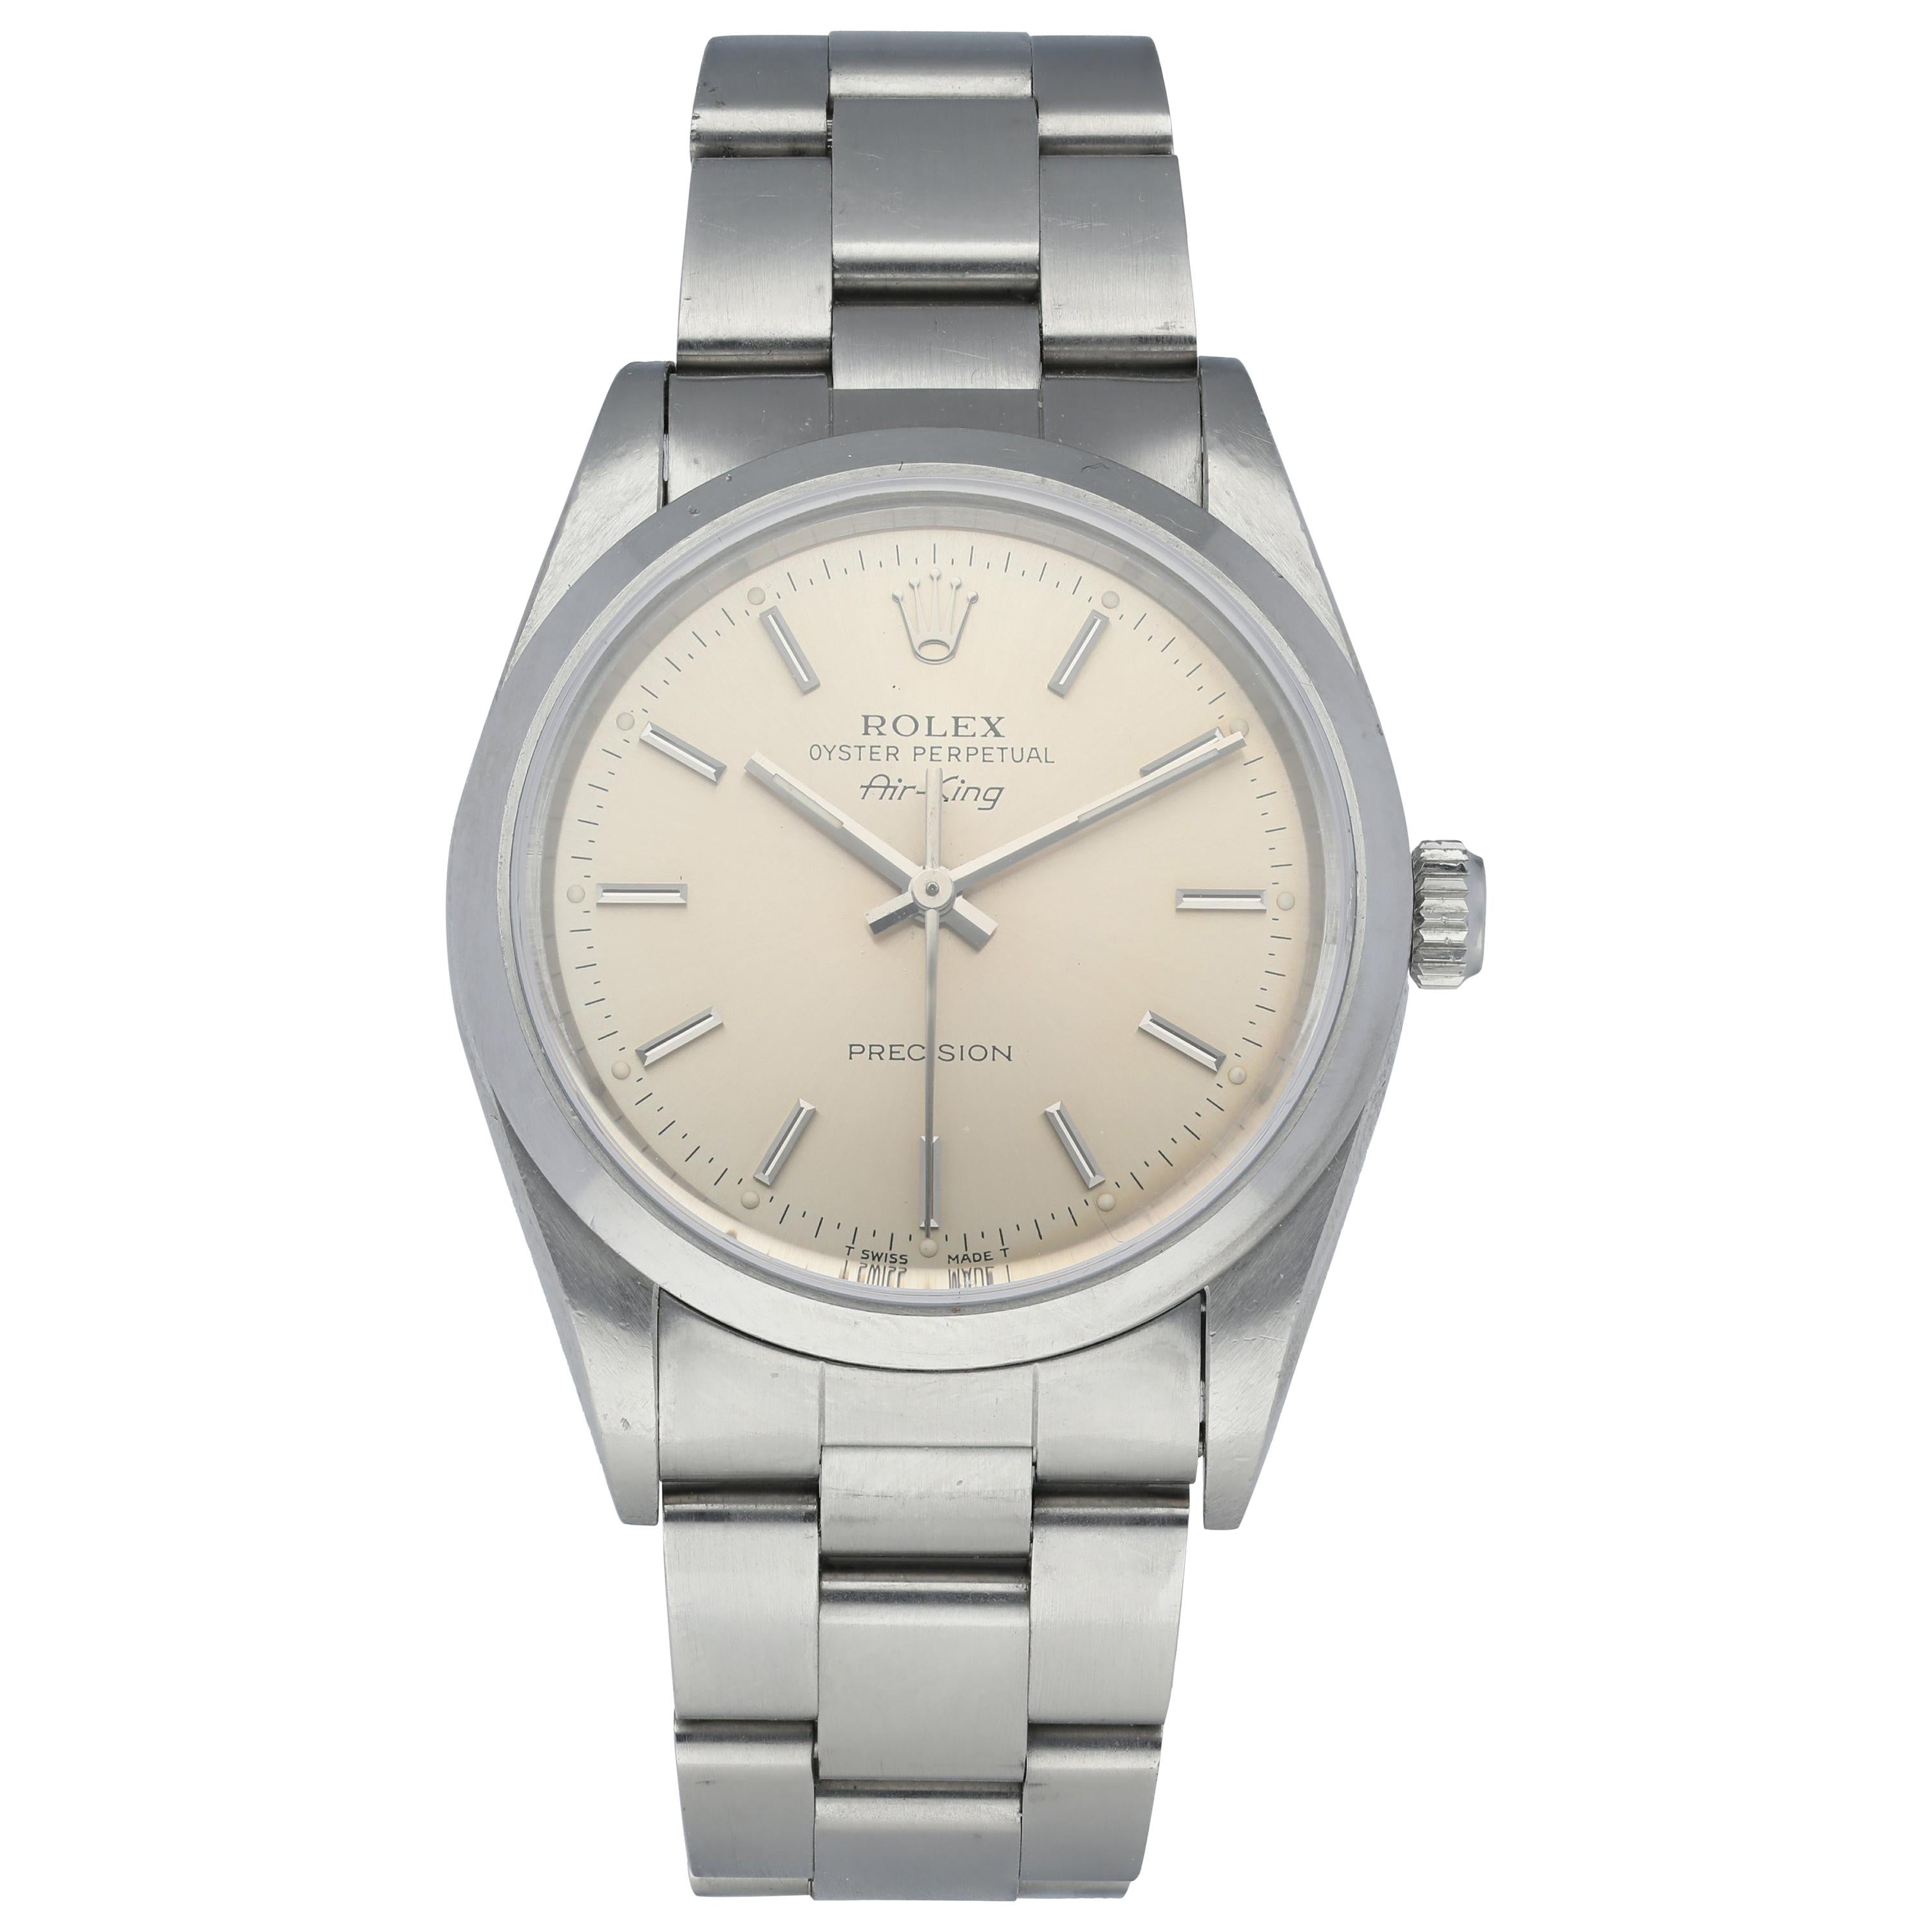 Rolex Air King 14000 Men's Watch For Sale